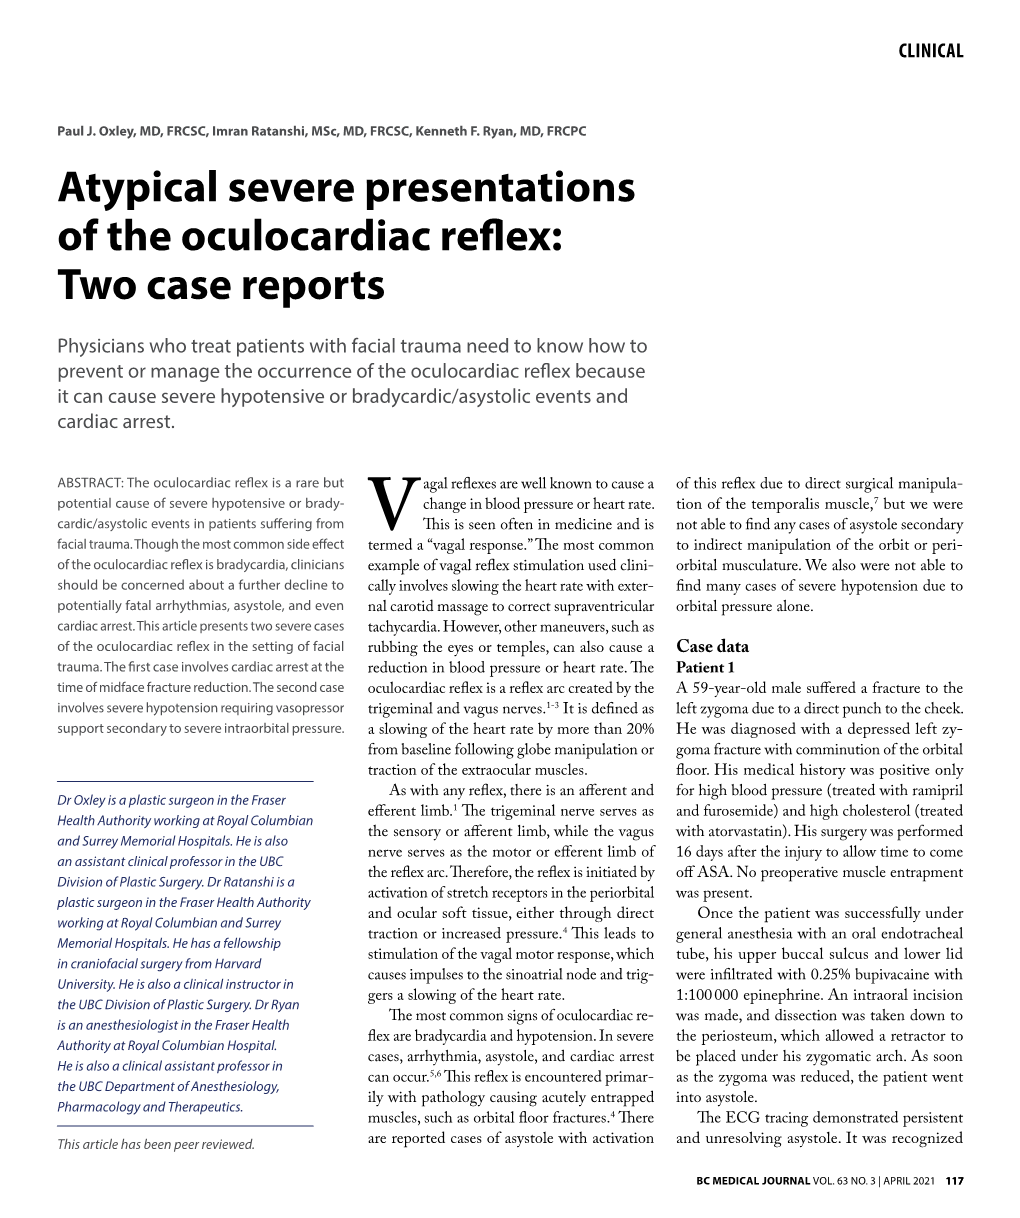 Atypical Severe Presentations of the Oculocardiac Reflex: Two Case Reports